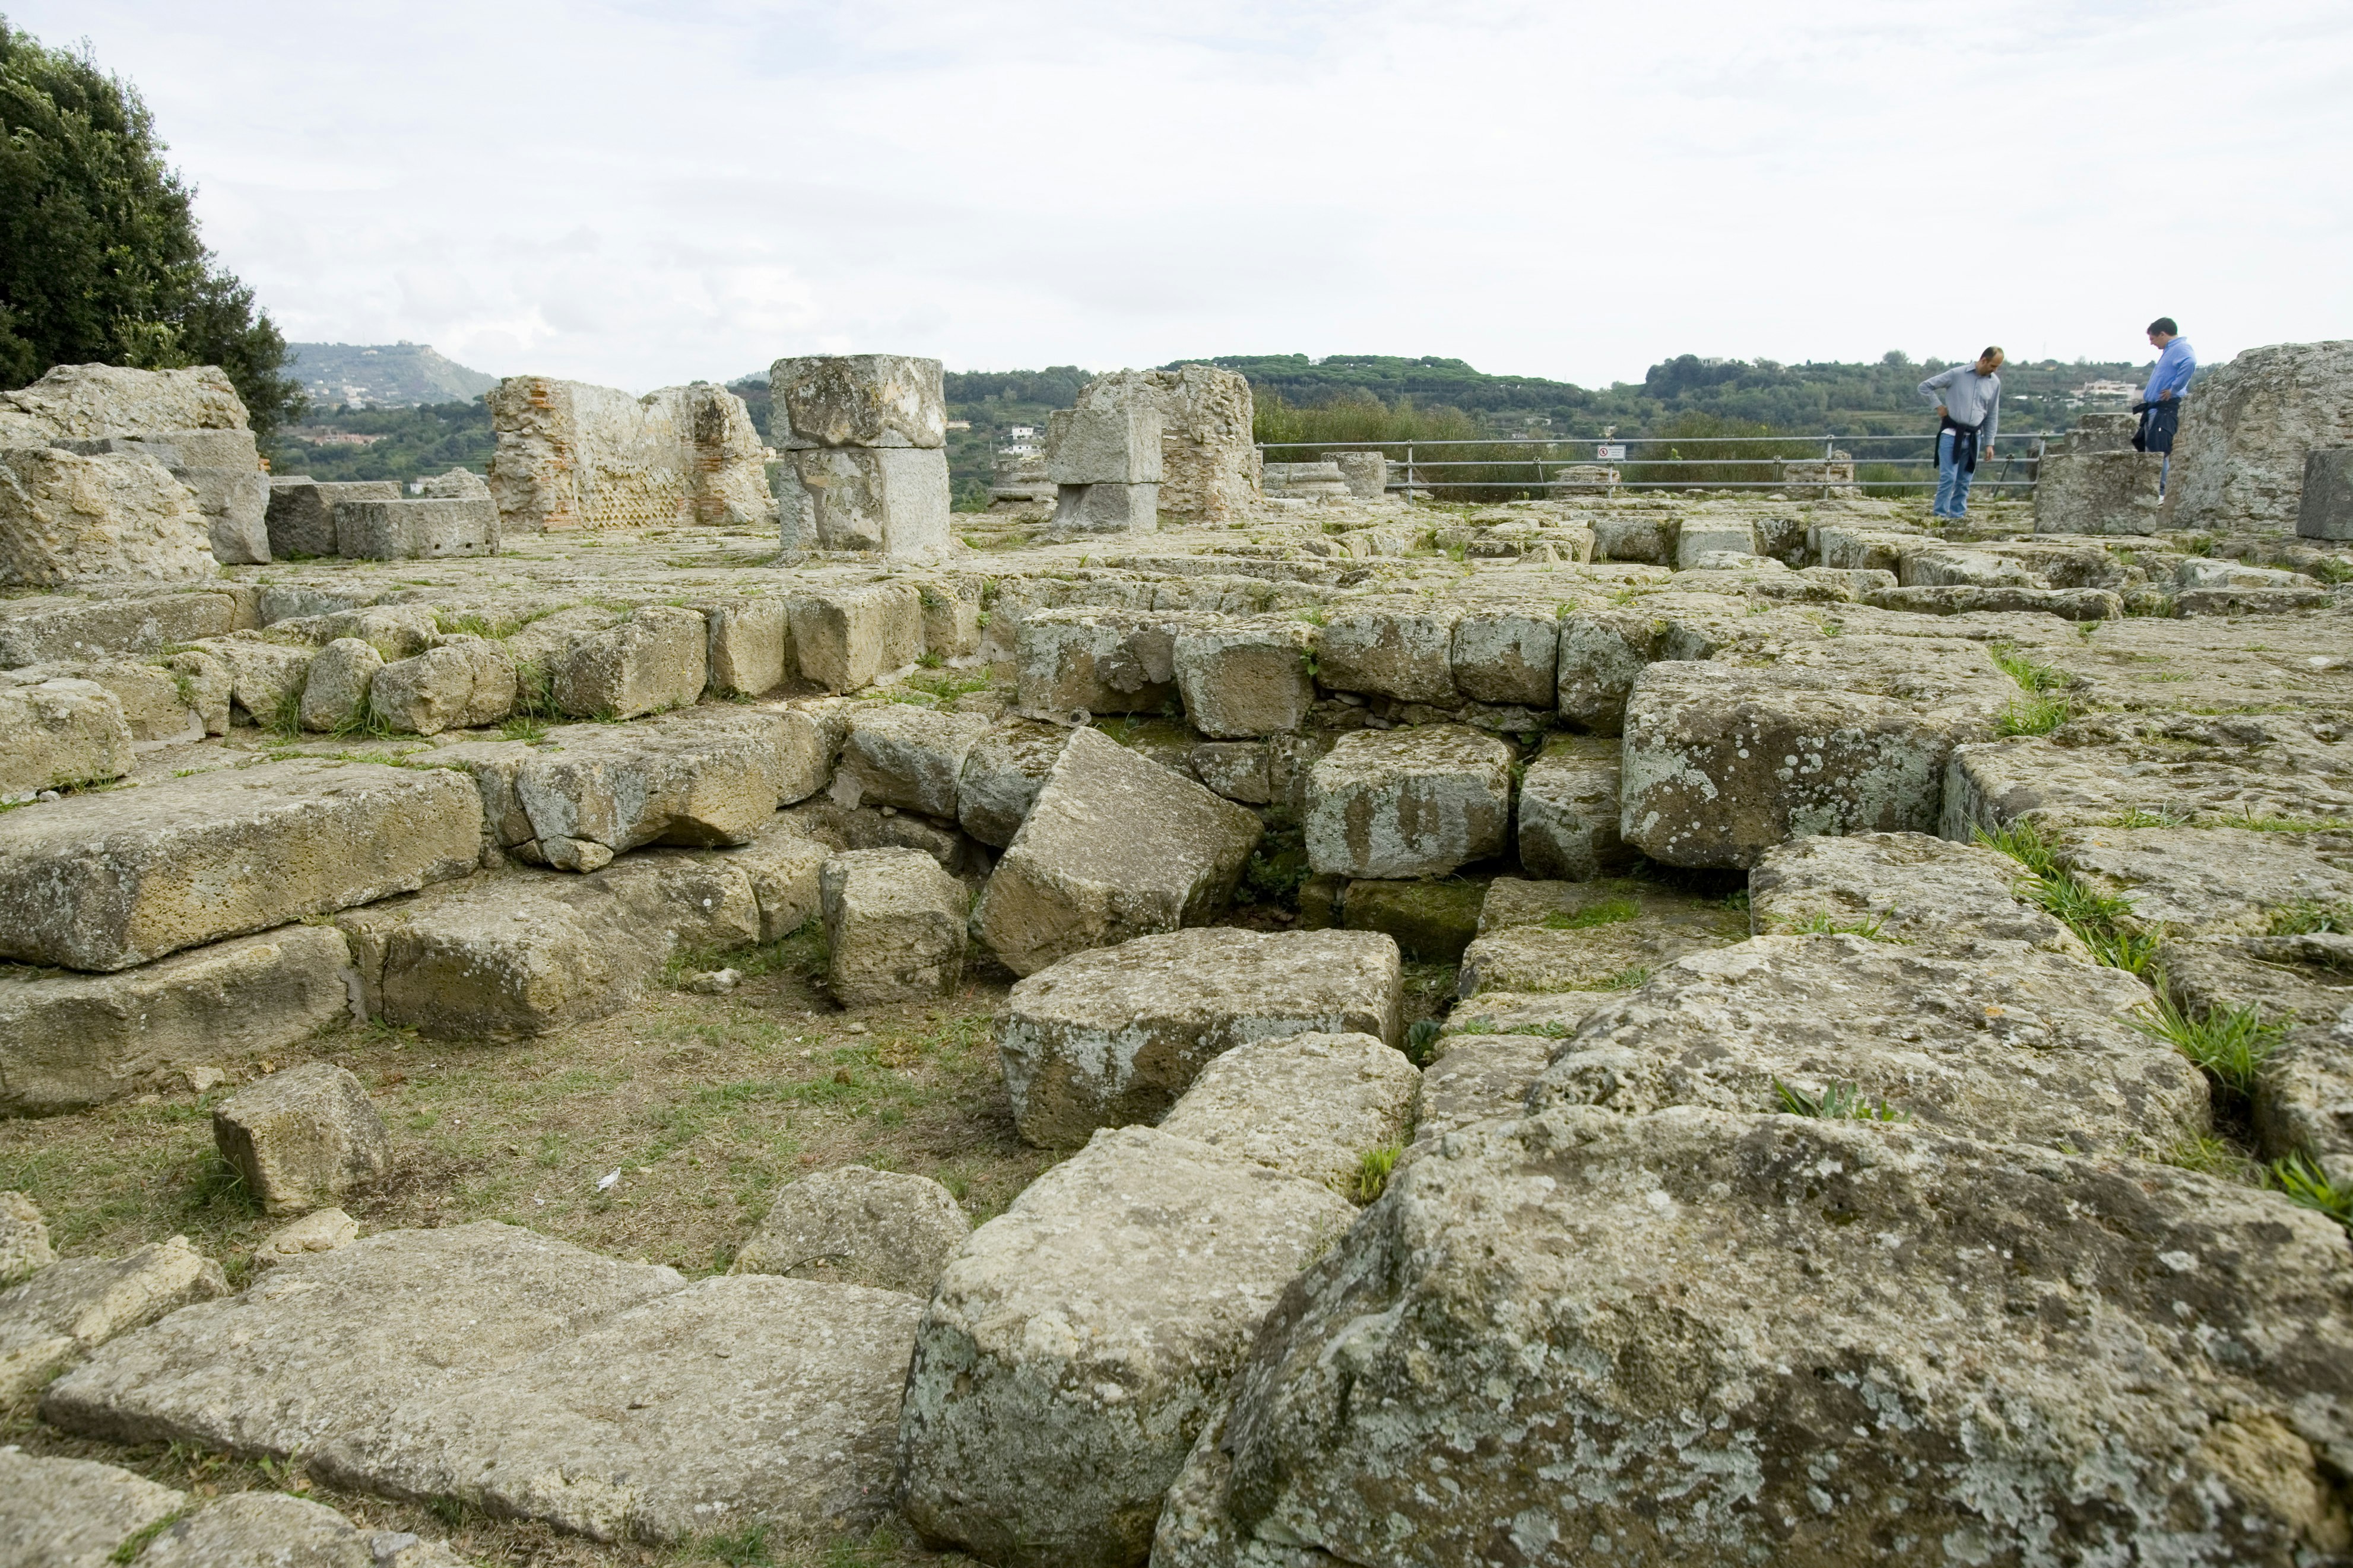 A picture of the ruins of Apollo's Temple in Cuma, Italy